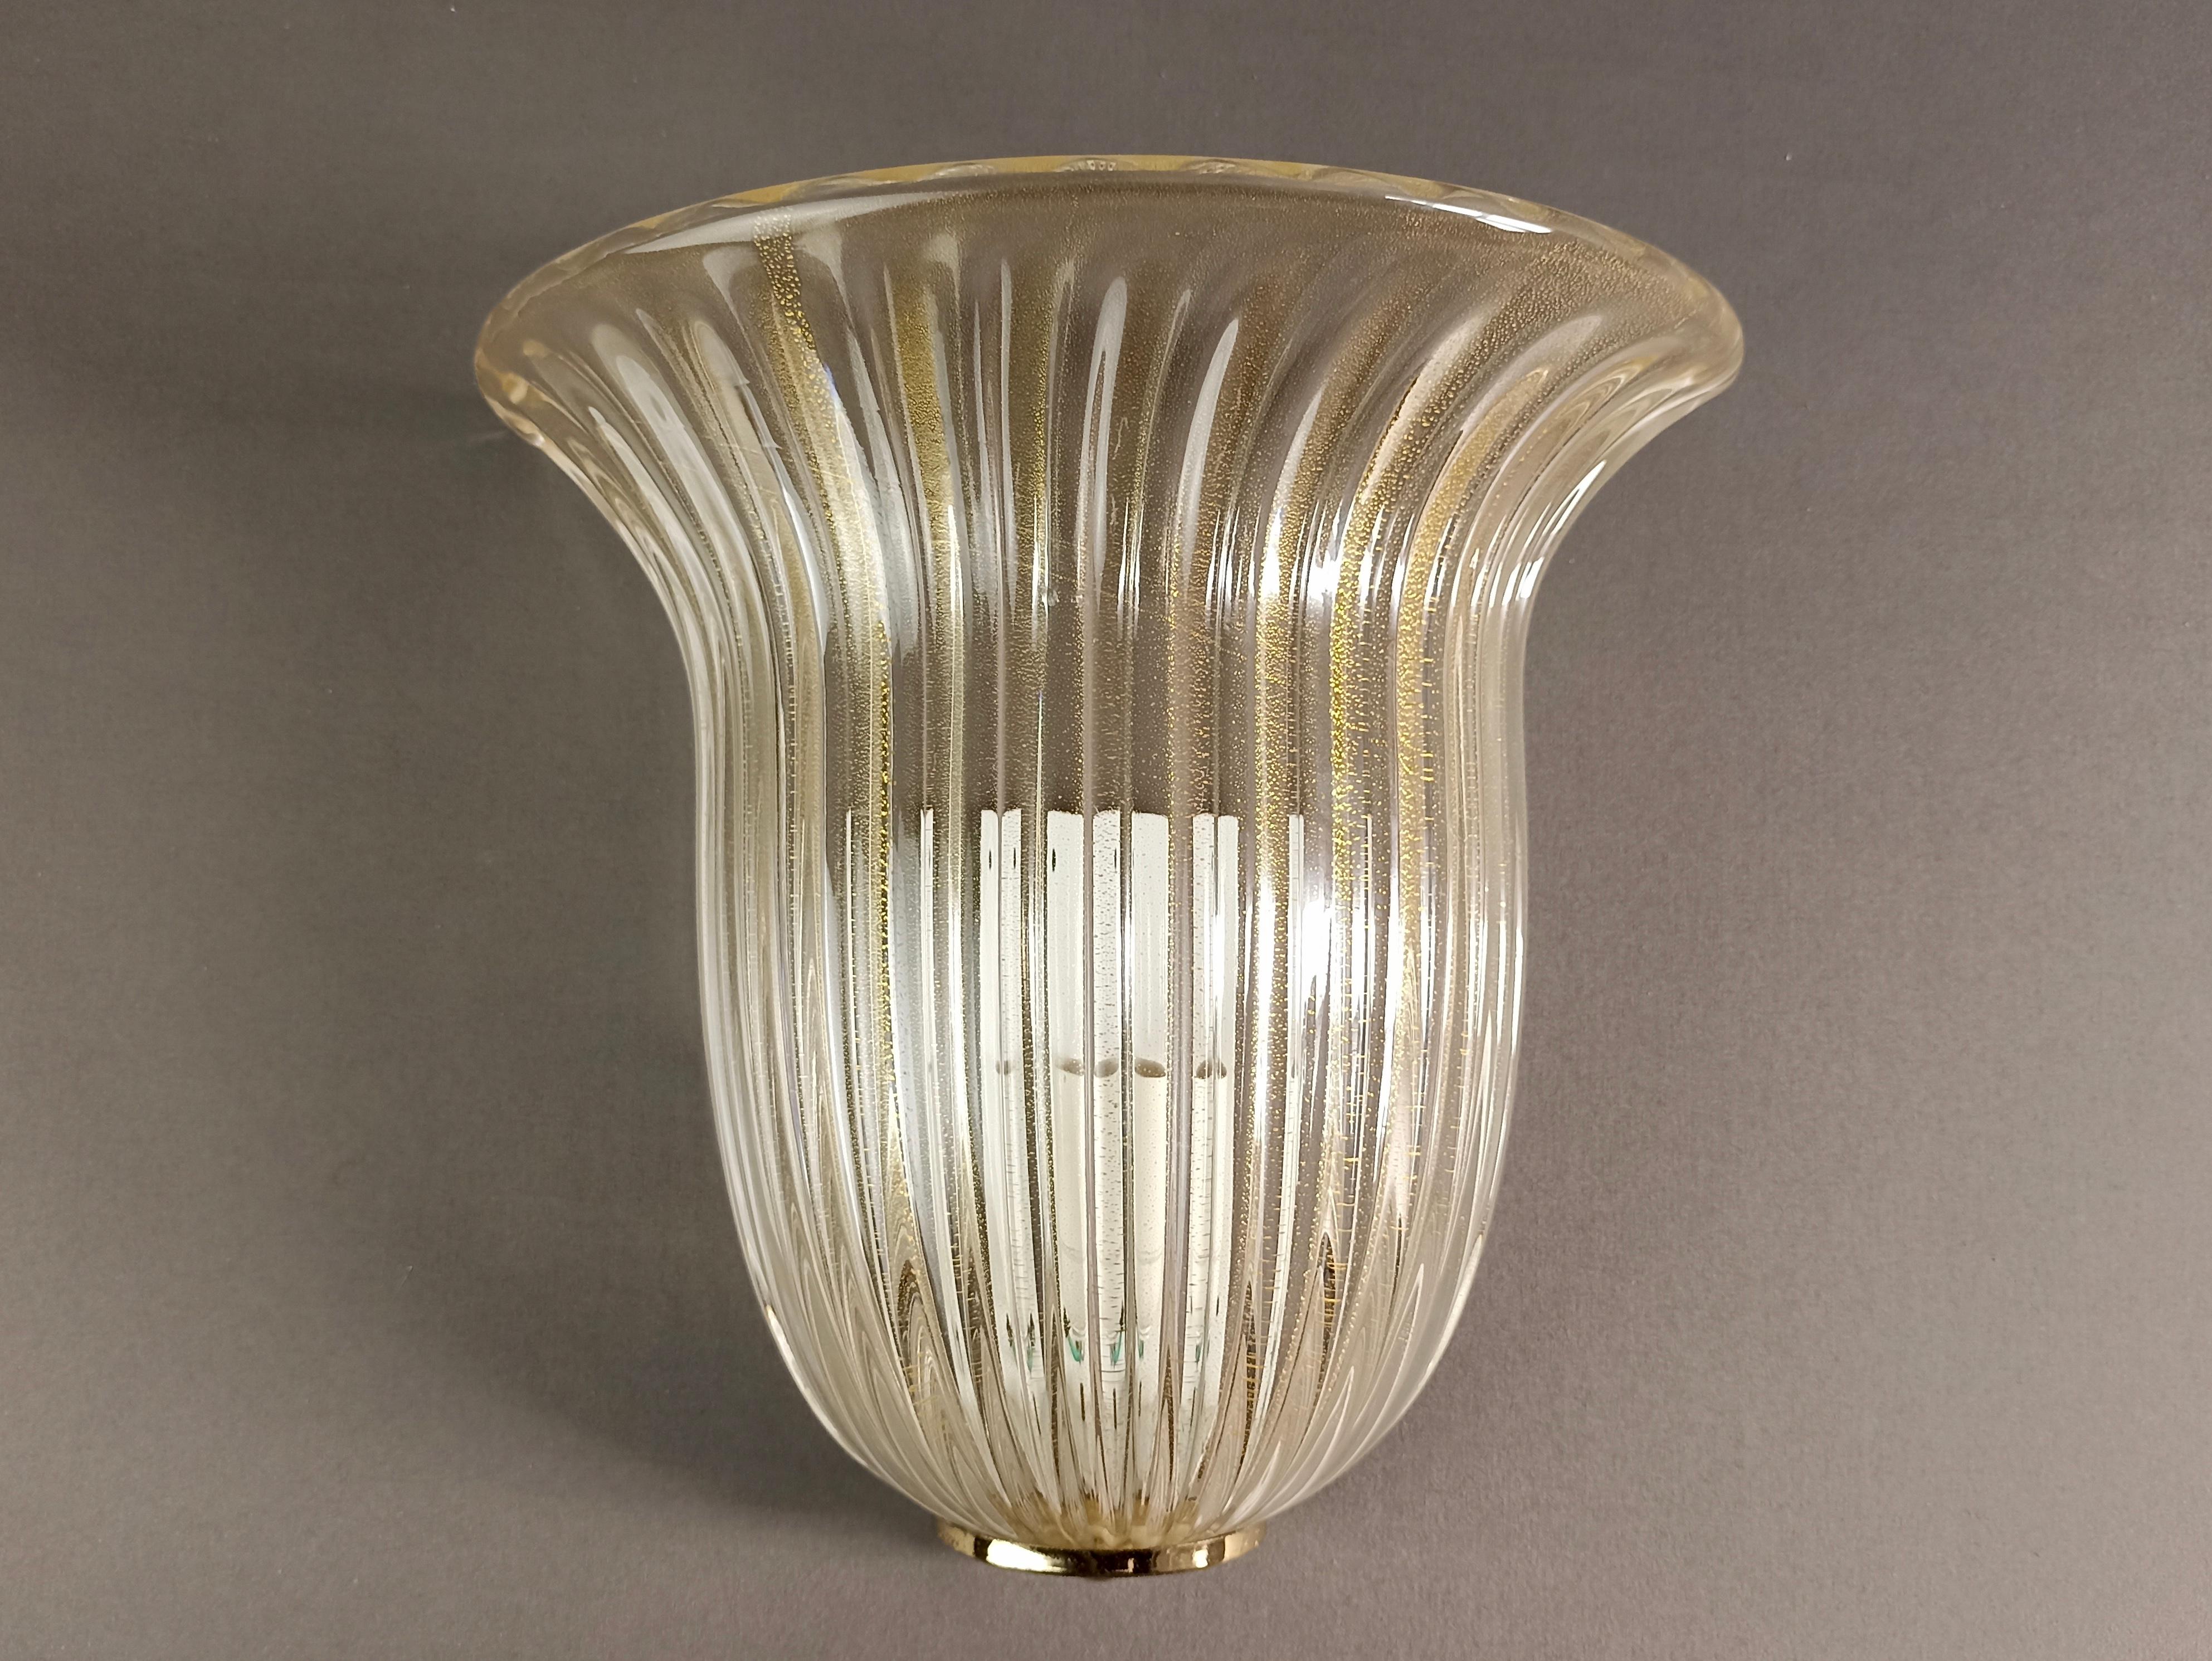 Beautiful single wall lamp from the 1980s made of clear Murano glass with gold inclusions, wonderful ribbed work, great style.
The lamp is fixed to the wall with a white lacquered metal base.
This is a truly refined and timeless object, which fits